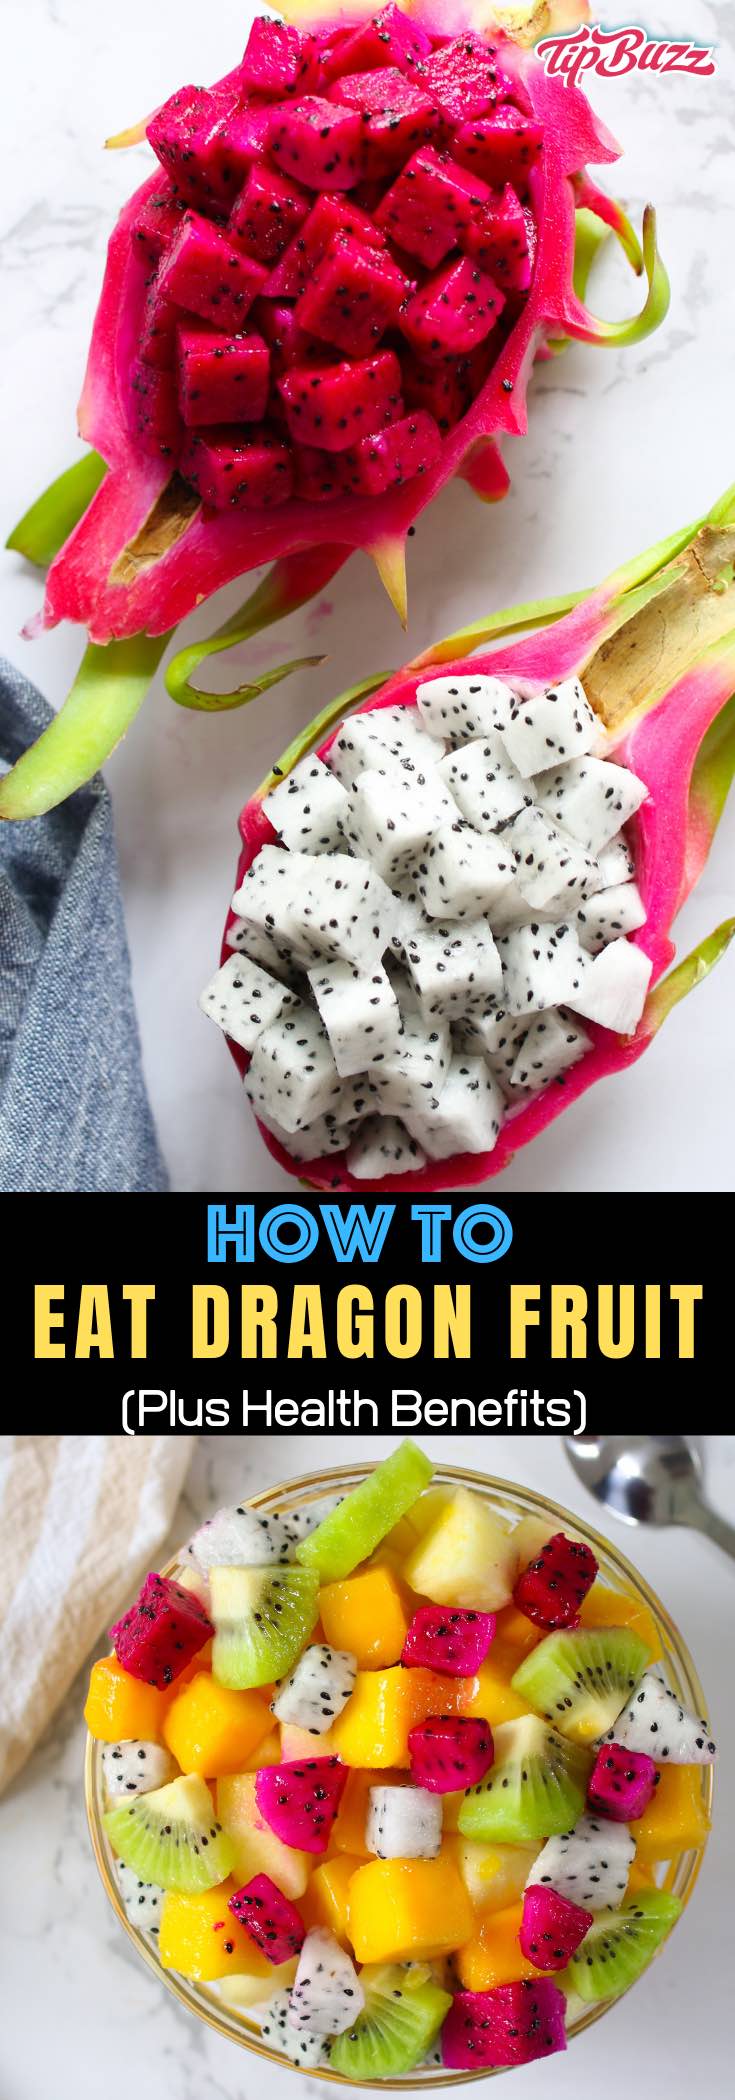 Dragon Fruit is a delicious tropical fruit with many health benefits. Learn how to cut dragon fruit easily and how to eat it whether you're making a smoothie, fruit salad or snack. #dragonfruit #reddragonfruit #whitedragonfruit